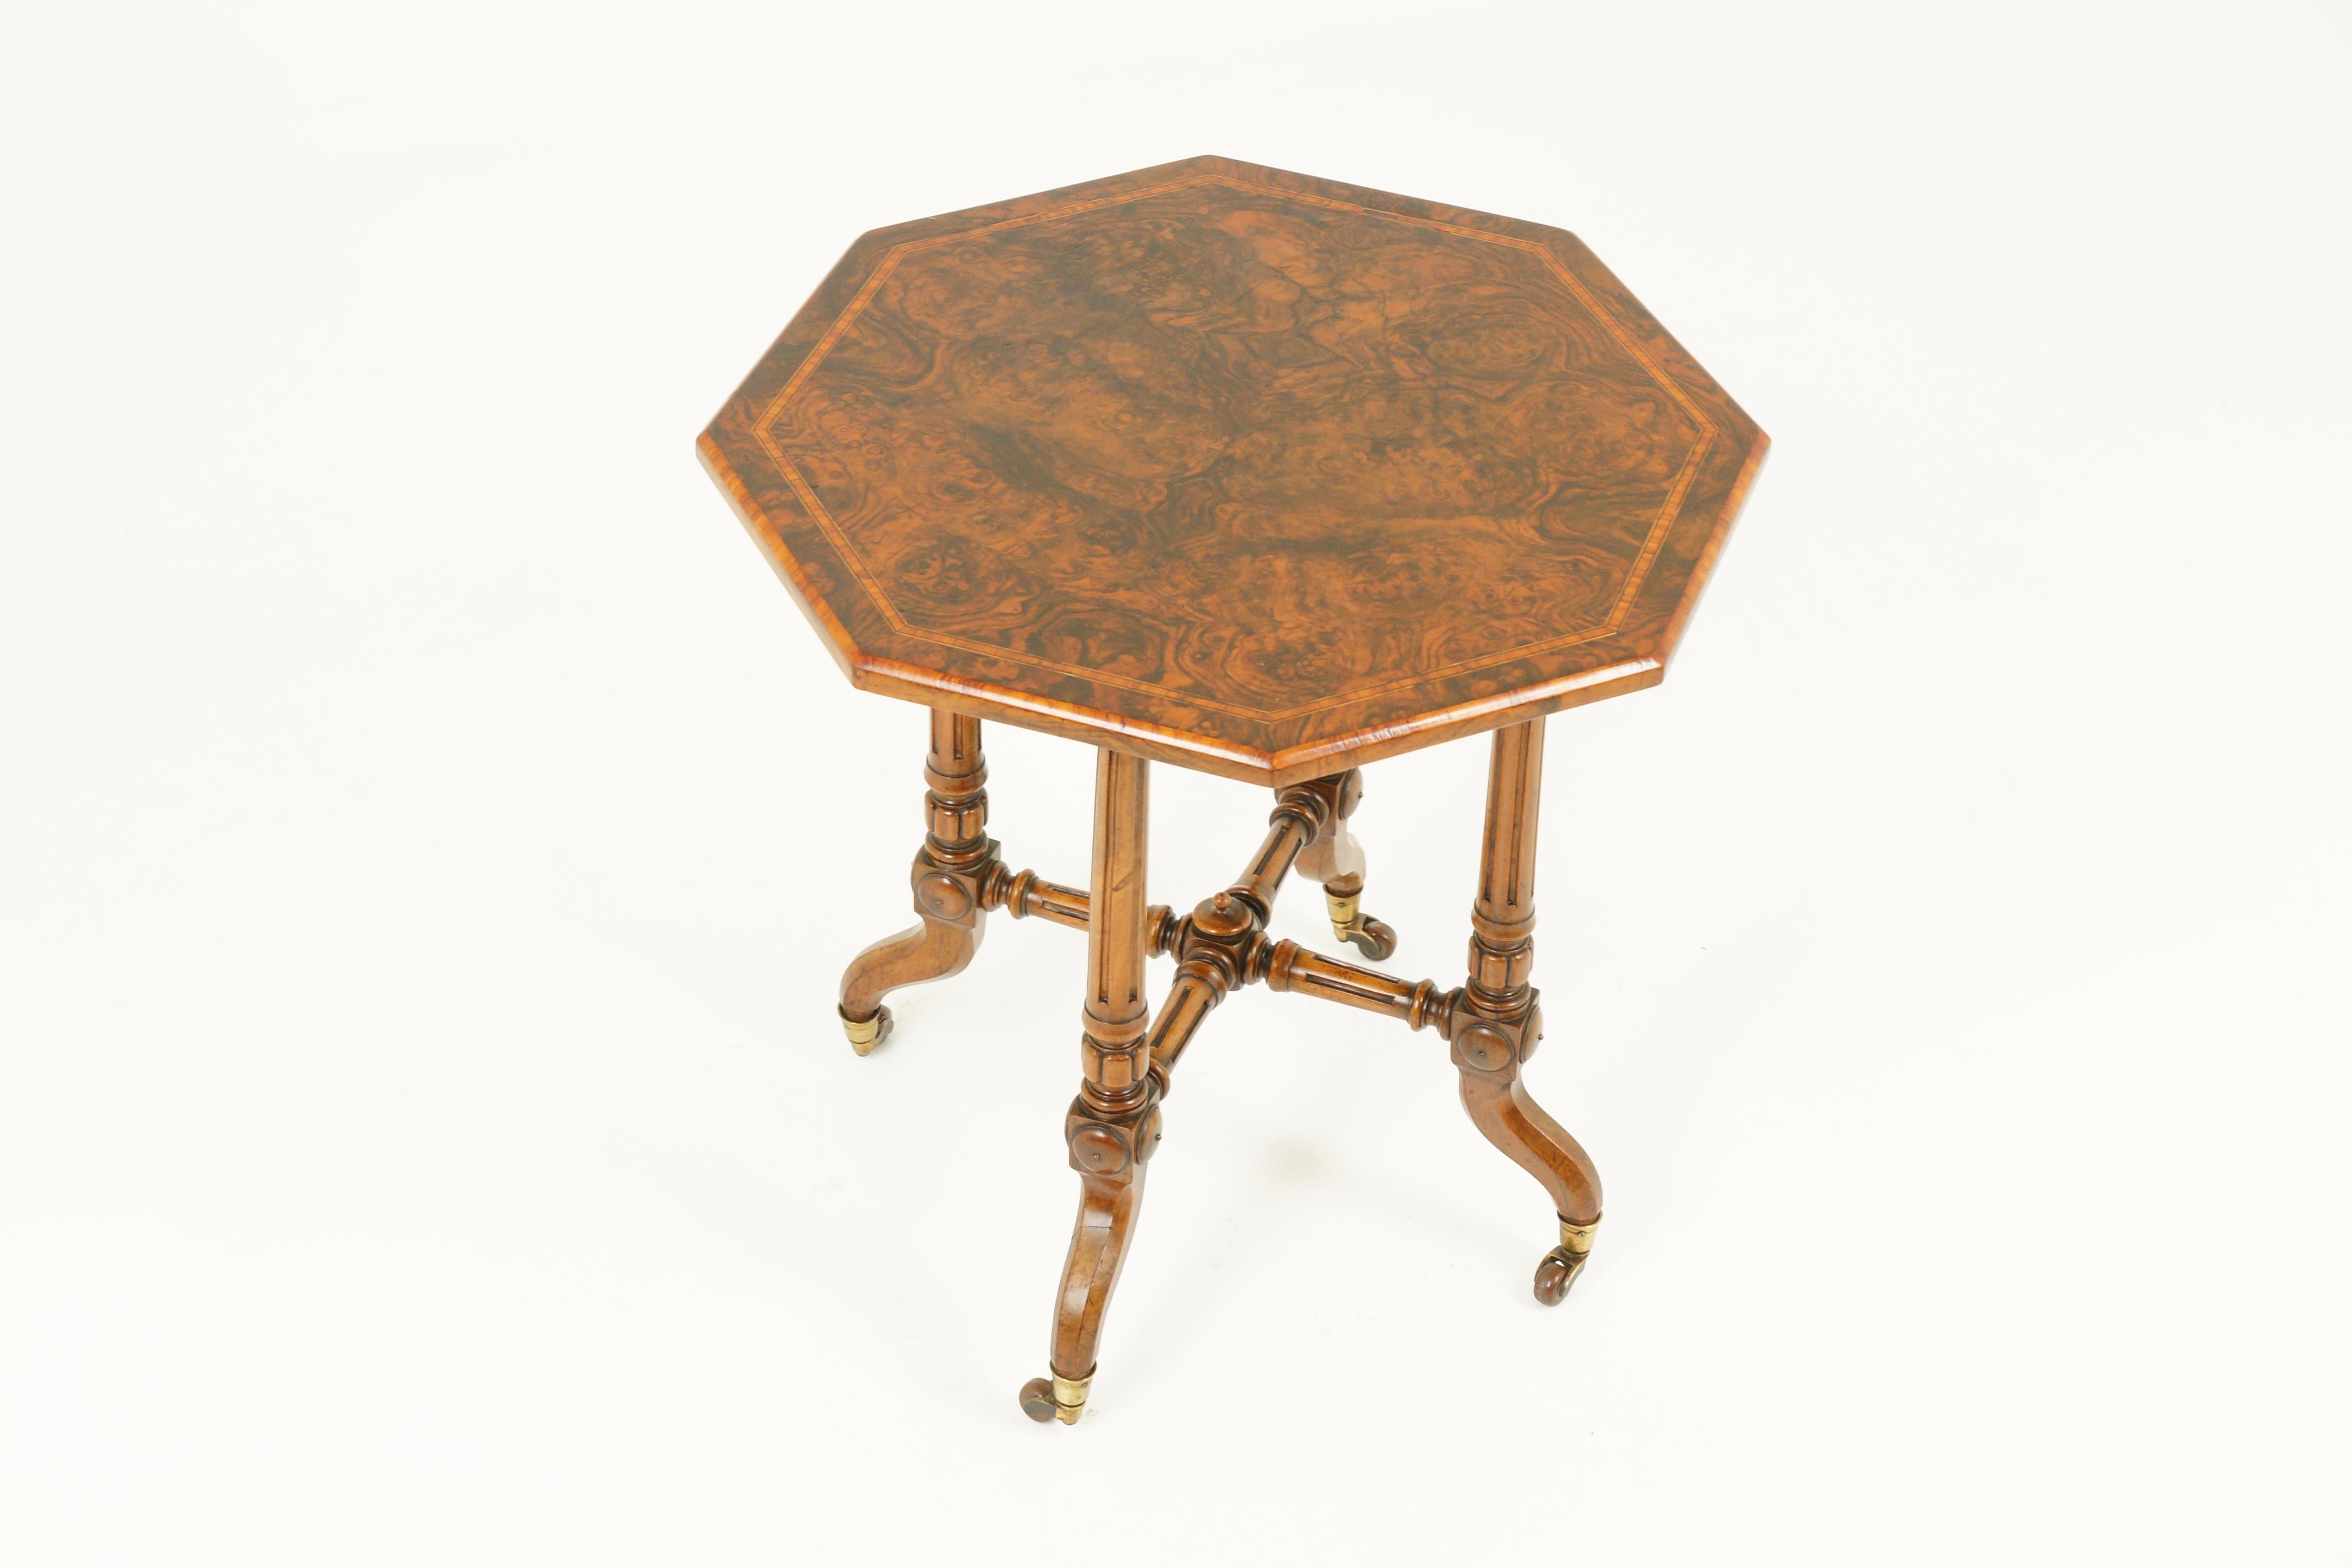 Antique Octagonal Table, Burr Walnut Table, Victorian, Scotland 1880, B1782

Scotland 1880
Solid walnut and veneers
inlaid octagonal top
wonderful burr walnut veneer
moulded edges below
raised on four turned shaped legs
connected by turned